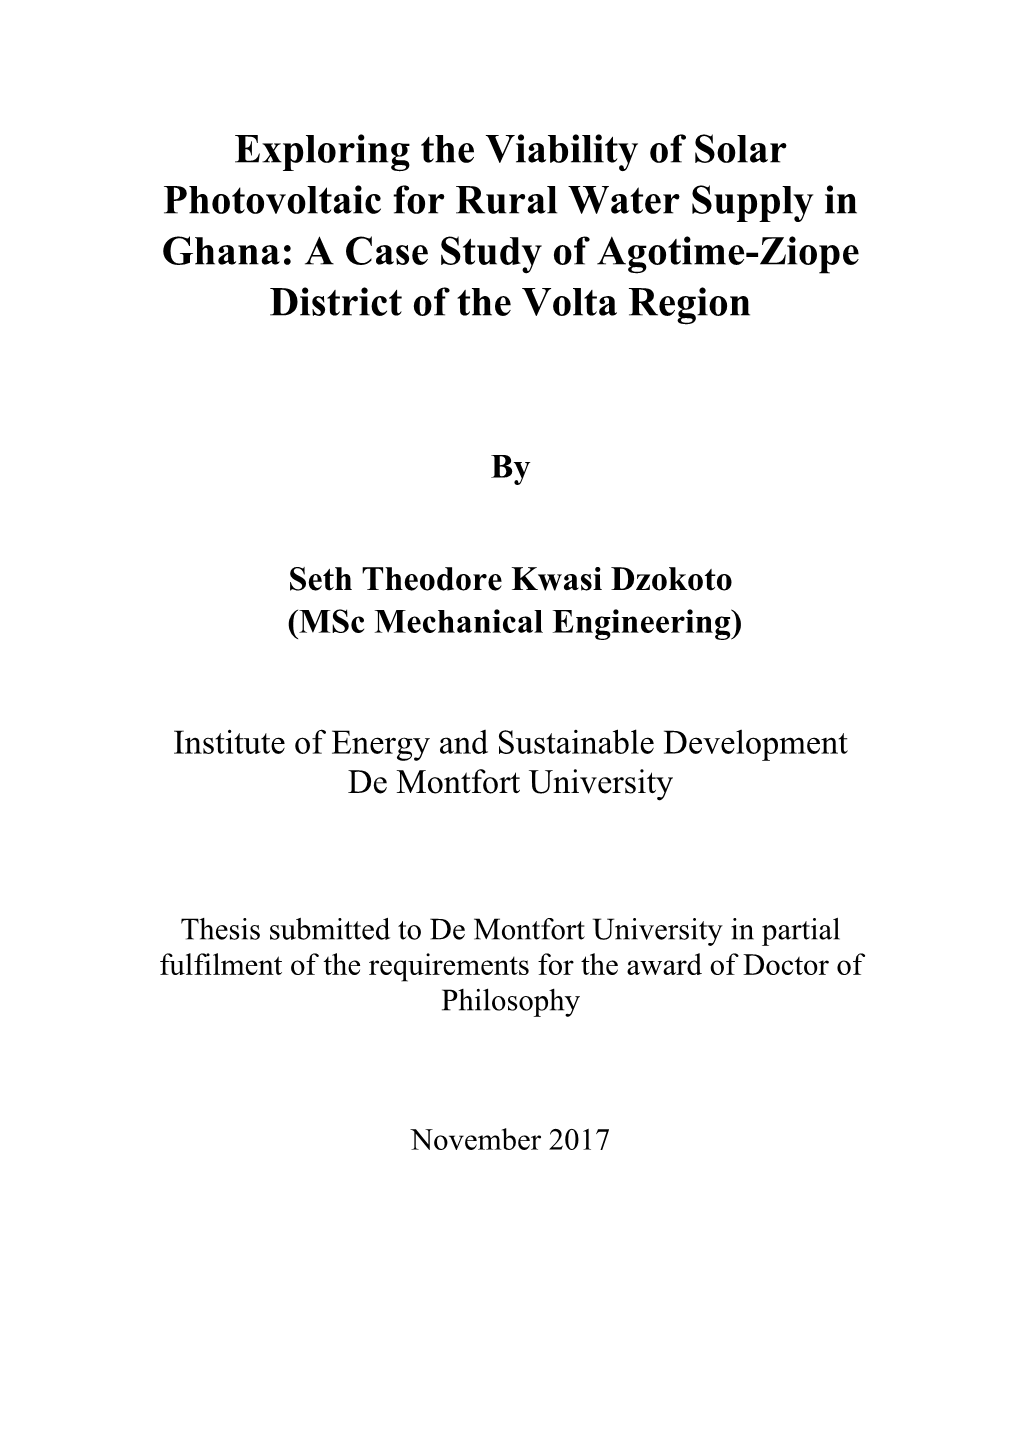 Exploring the Viability of Solar Photovoltaic for Rural Water Supply in Ghana: a Case Study of Agotime-Ziope District of the Volta Region